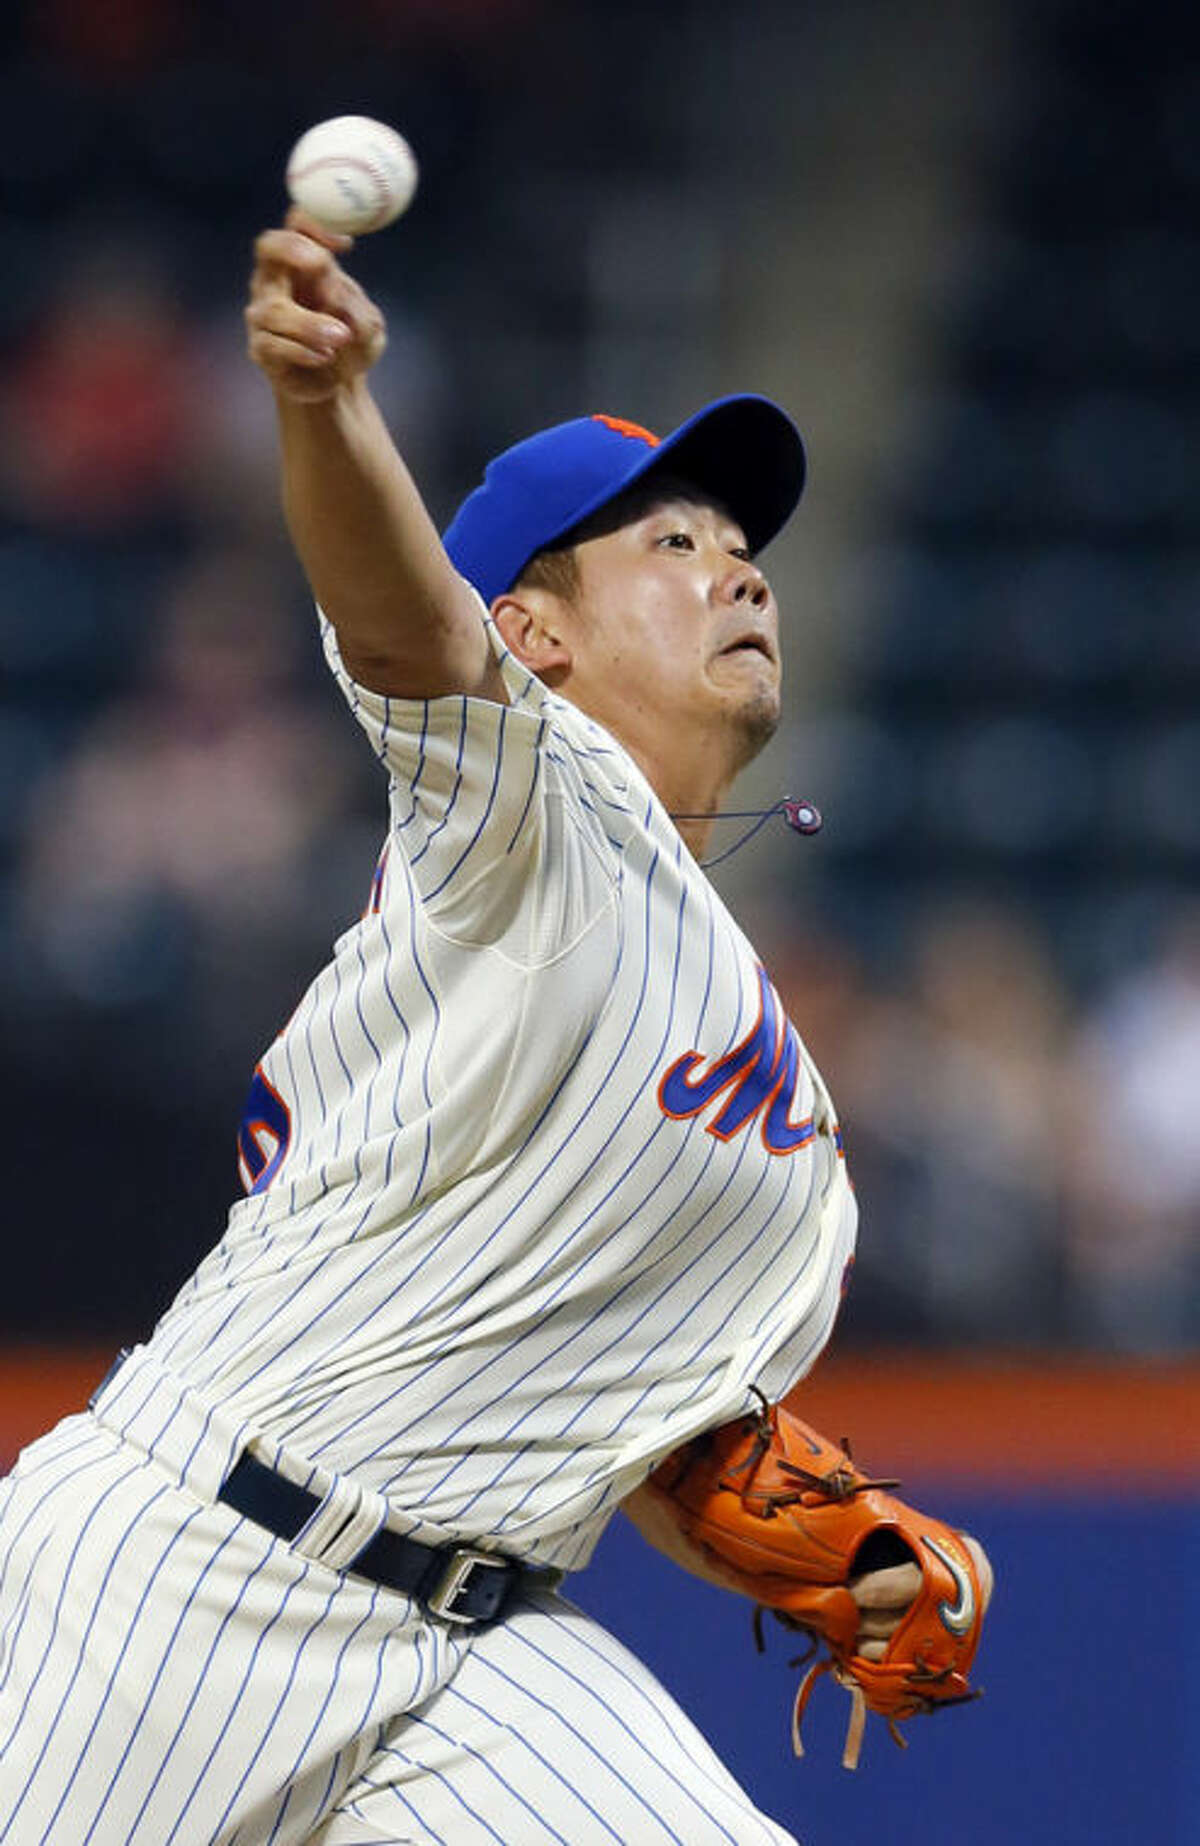 New York Mets starting pitcher Daisuke Matsuzaka throws in the first inning of a baseball game against the Philadelphia Phillies at Citi Field in New York, Wednesday, Aug. 28, 2013. (AP Photo/Paul J. Bereswill)